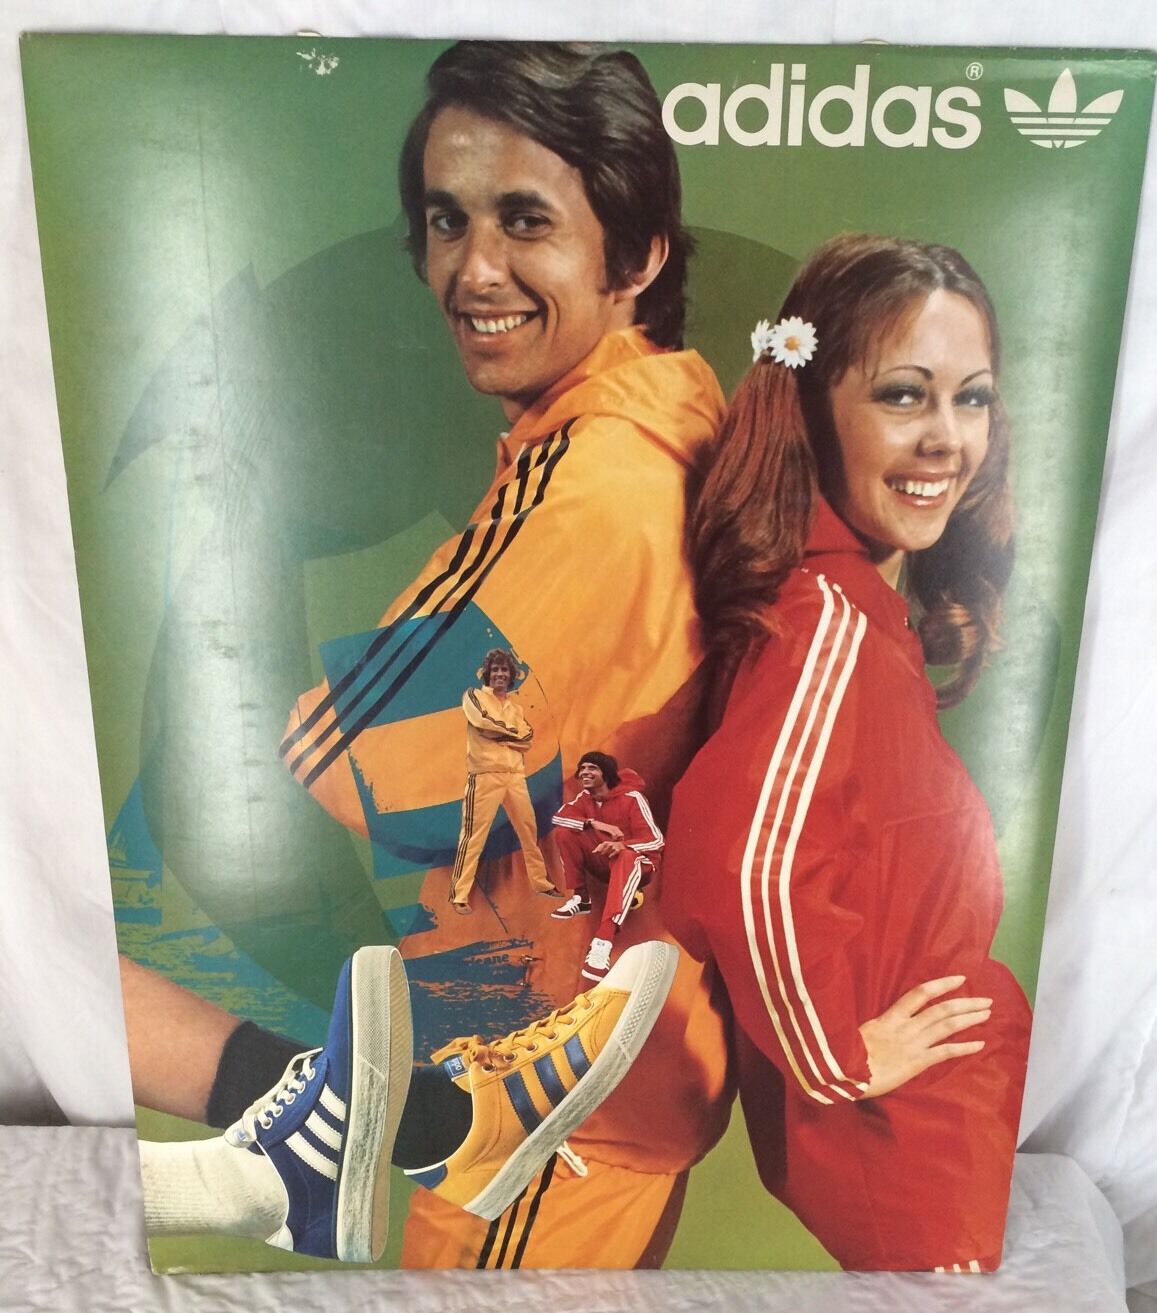 Vintage Adidas Shoes Store Display Advertisement Cardboard Poster Track Jackets